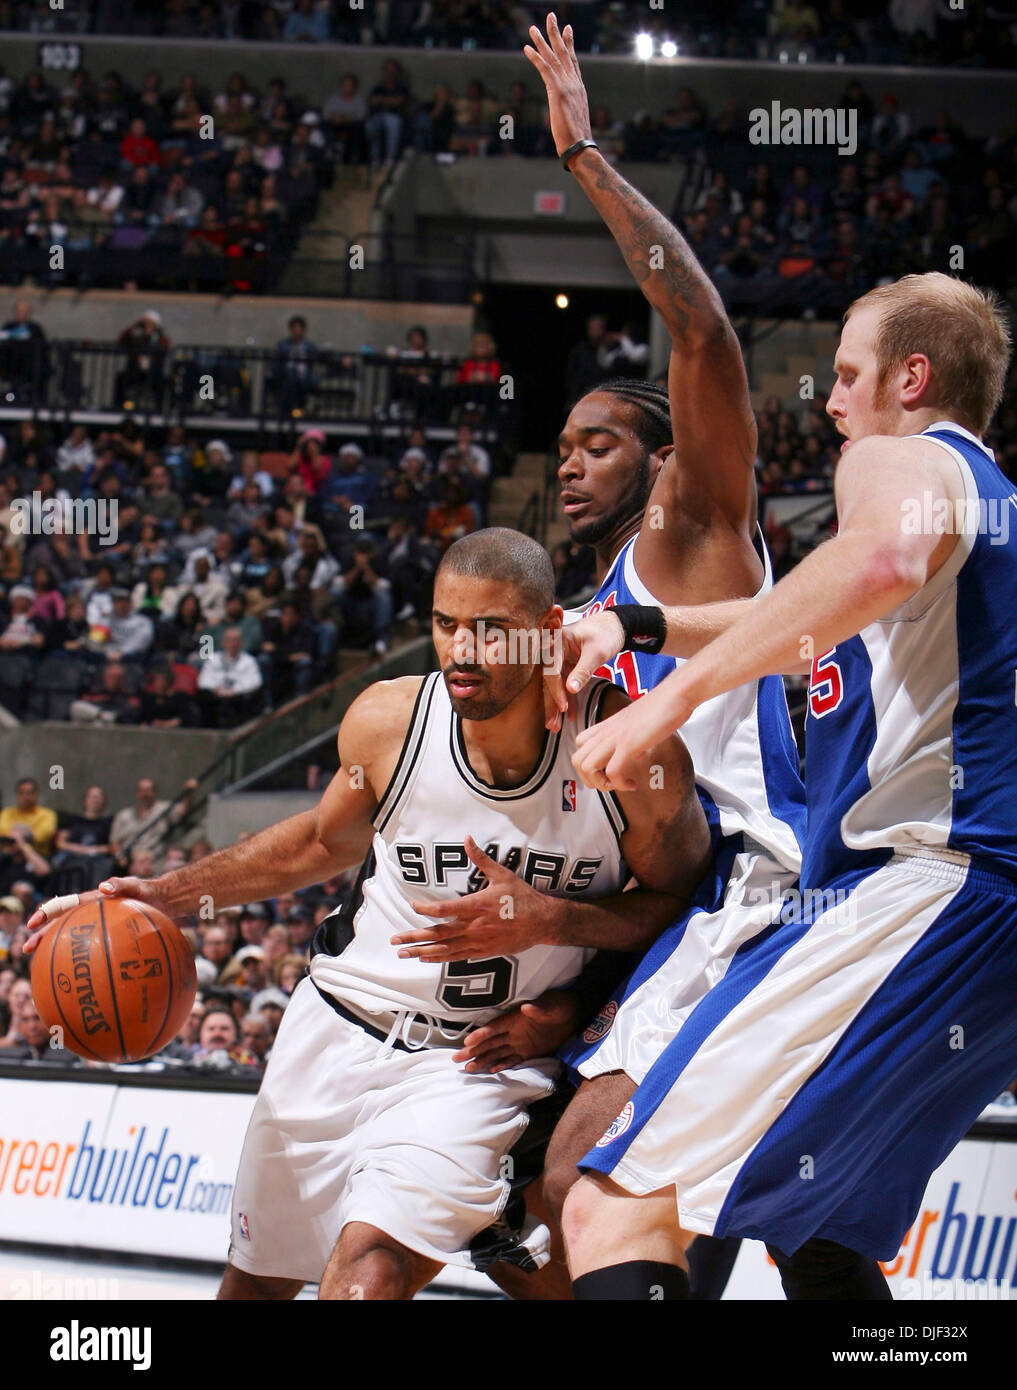 Dec 22, 2007 - San Antonio, Texas, USA - Spurs' IME UDOKA drives around Clippers' JOSH POWELL and CHRIS KAMAN during second half action Saturday Dec. 22, 2007 at the AT&T Center. The Spurs won 99-90.  (Credit Image: © Edward A. Ornelas/San Antonio Express-News/ZUMA Press) RESTRICTIONS: * San Antonio, Seattle Newspapers and USA Tabloids Rights OUT * Stock Photo